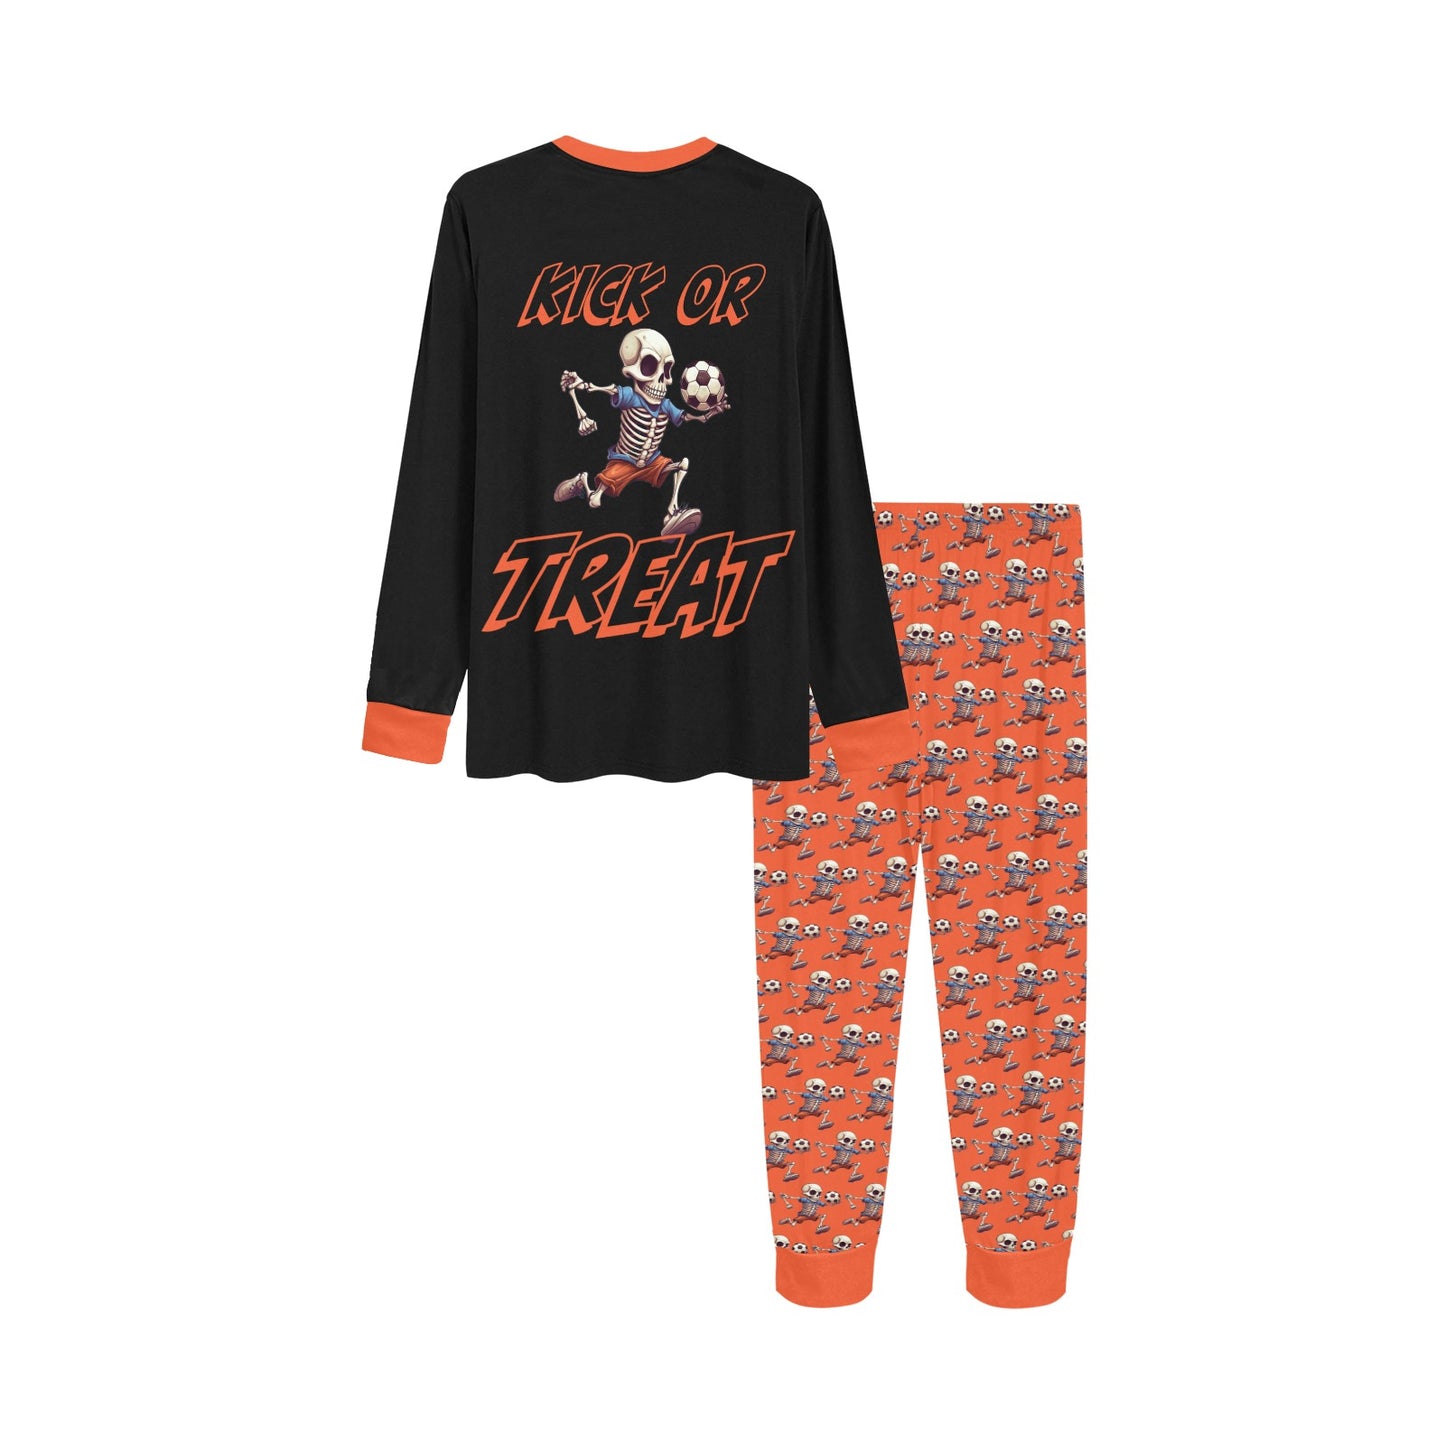 🎃🏆 Trick or Treat, Soccer Style! • Spooky Soccer Pajamas • Score Goals and Collect Candy!